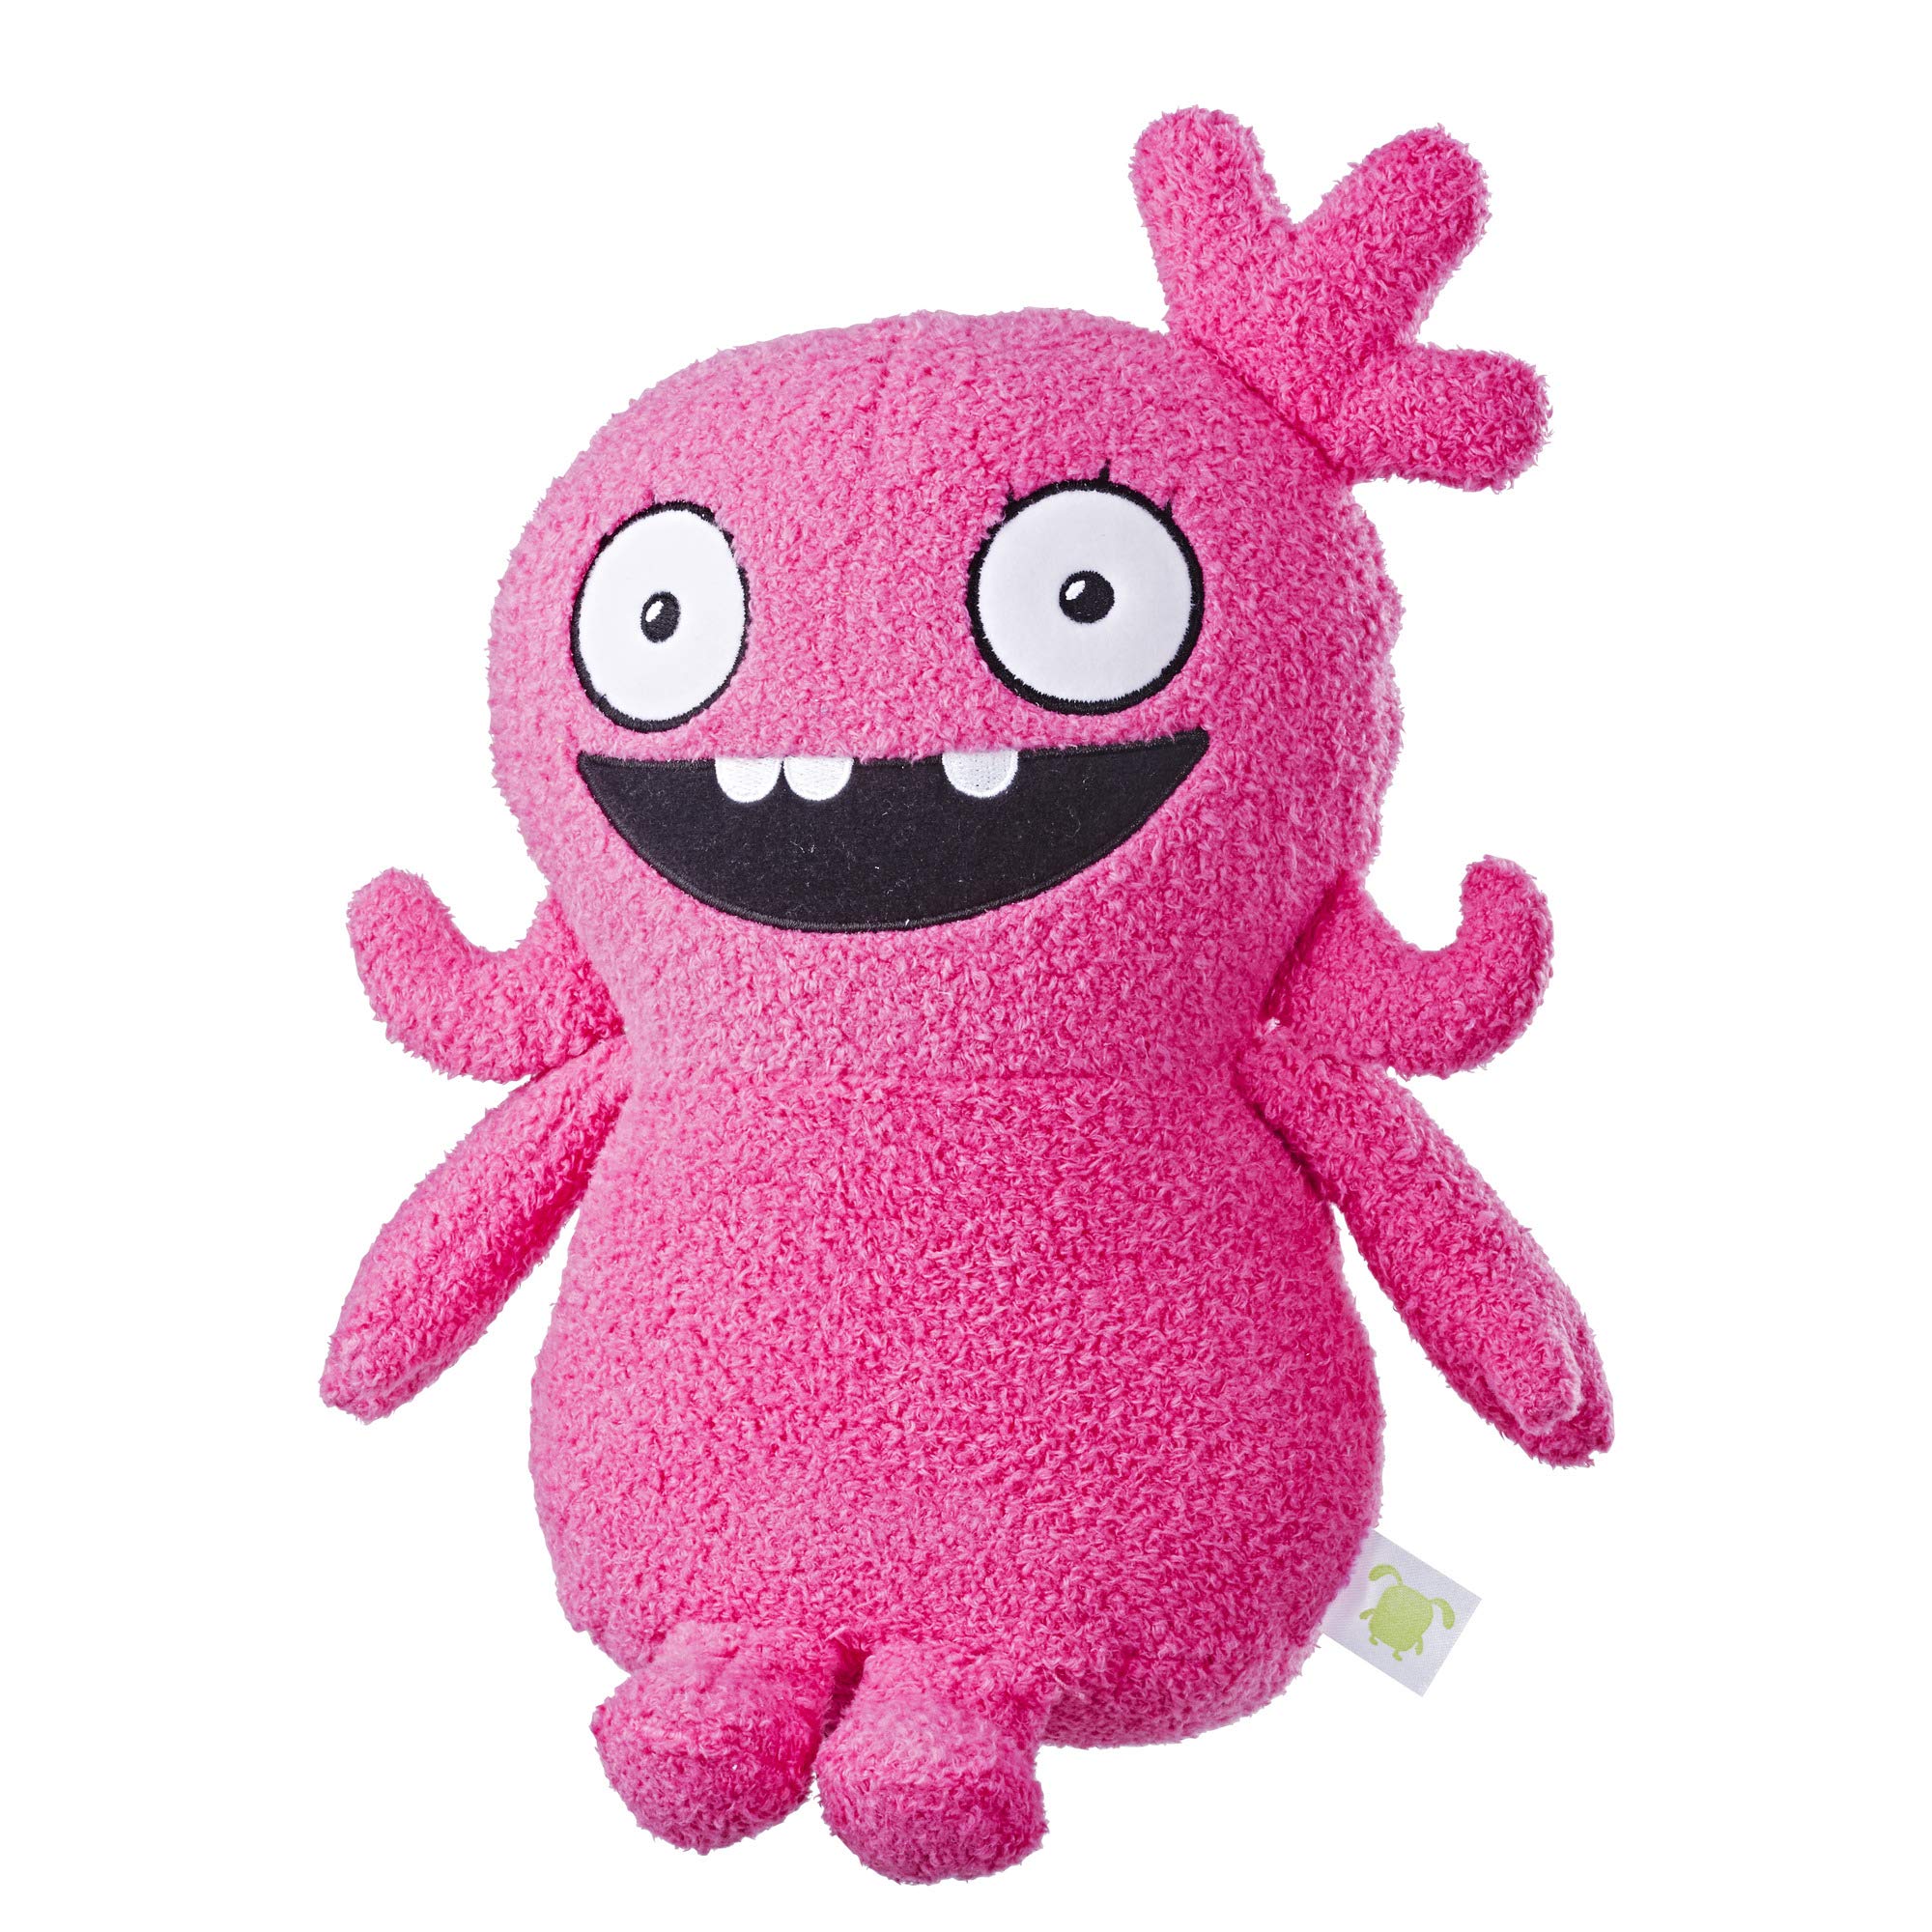 Book Cover Hasbro Uglydolls Feature Sounds Moxy, Stuffed Plush Toy That Talks, 11.5